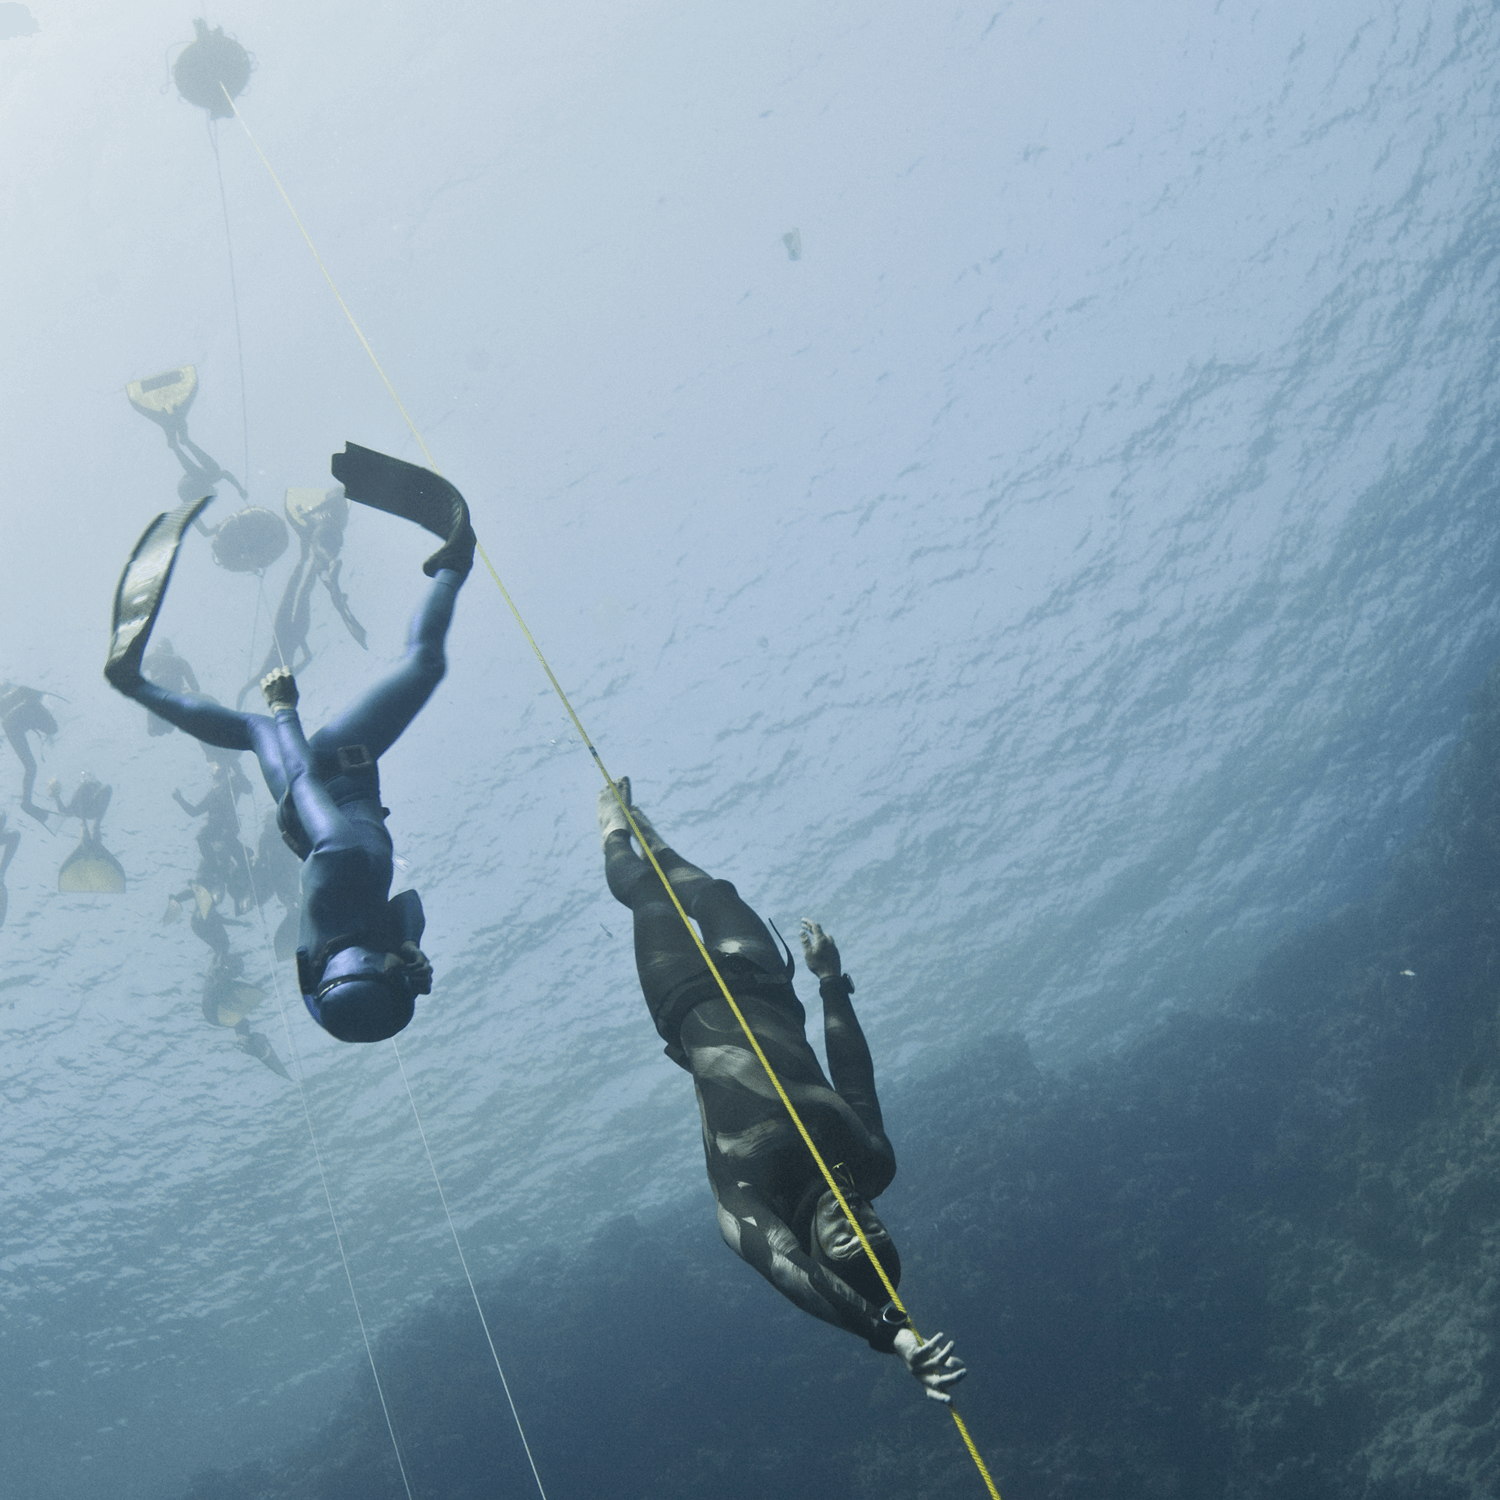 Freediving Competitions